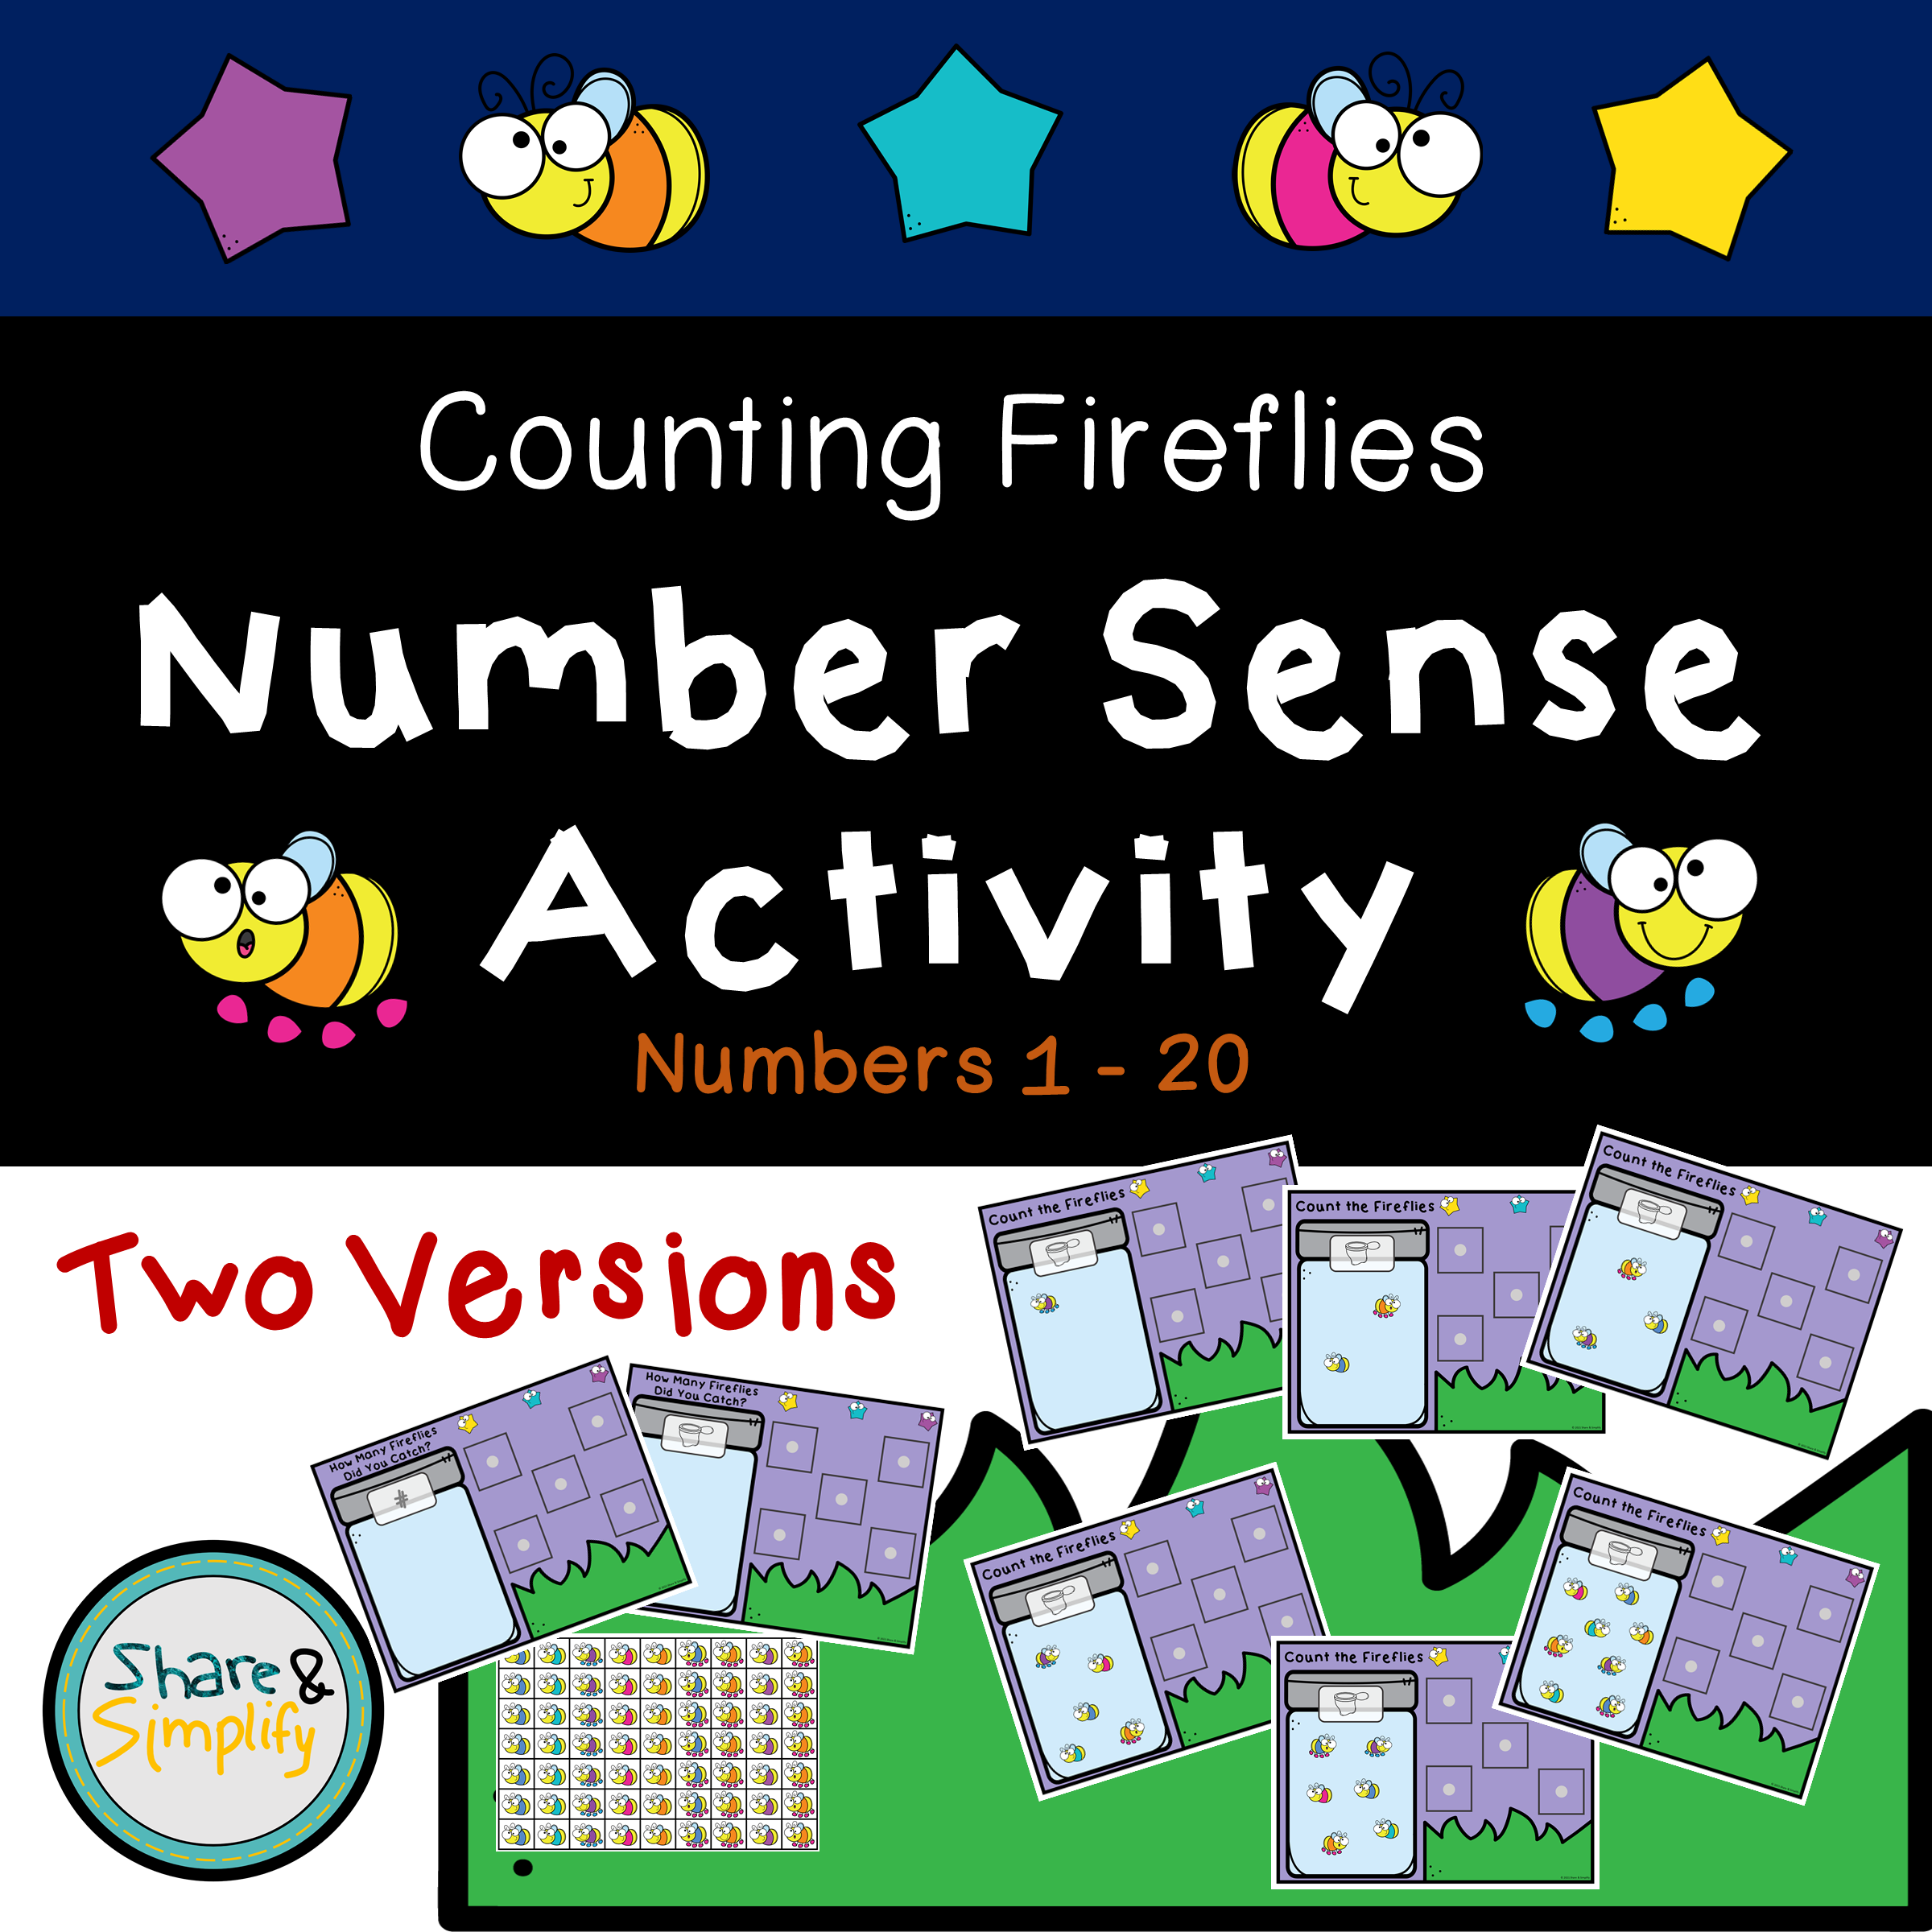 Number Sense Activity - Counting Fireflies's featured image